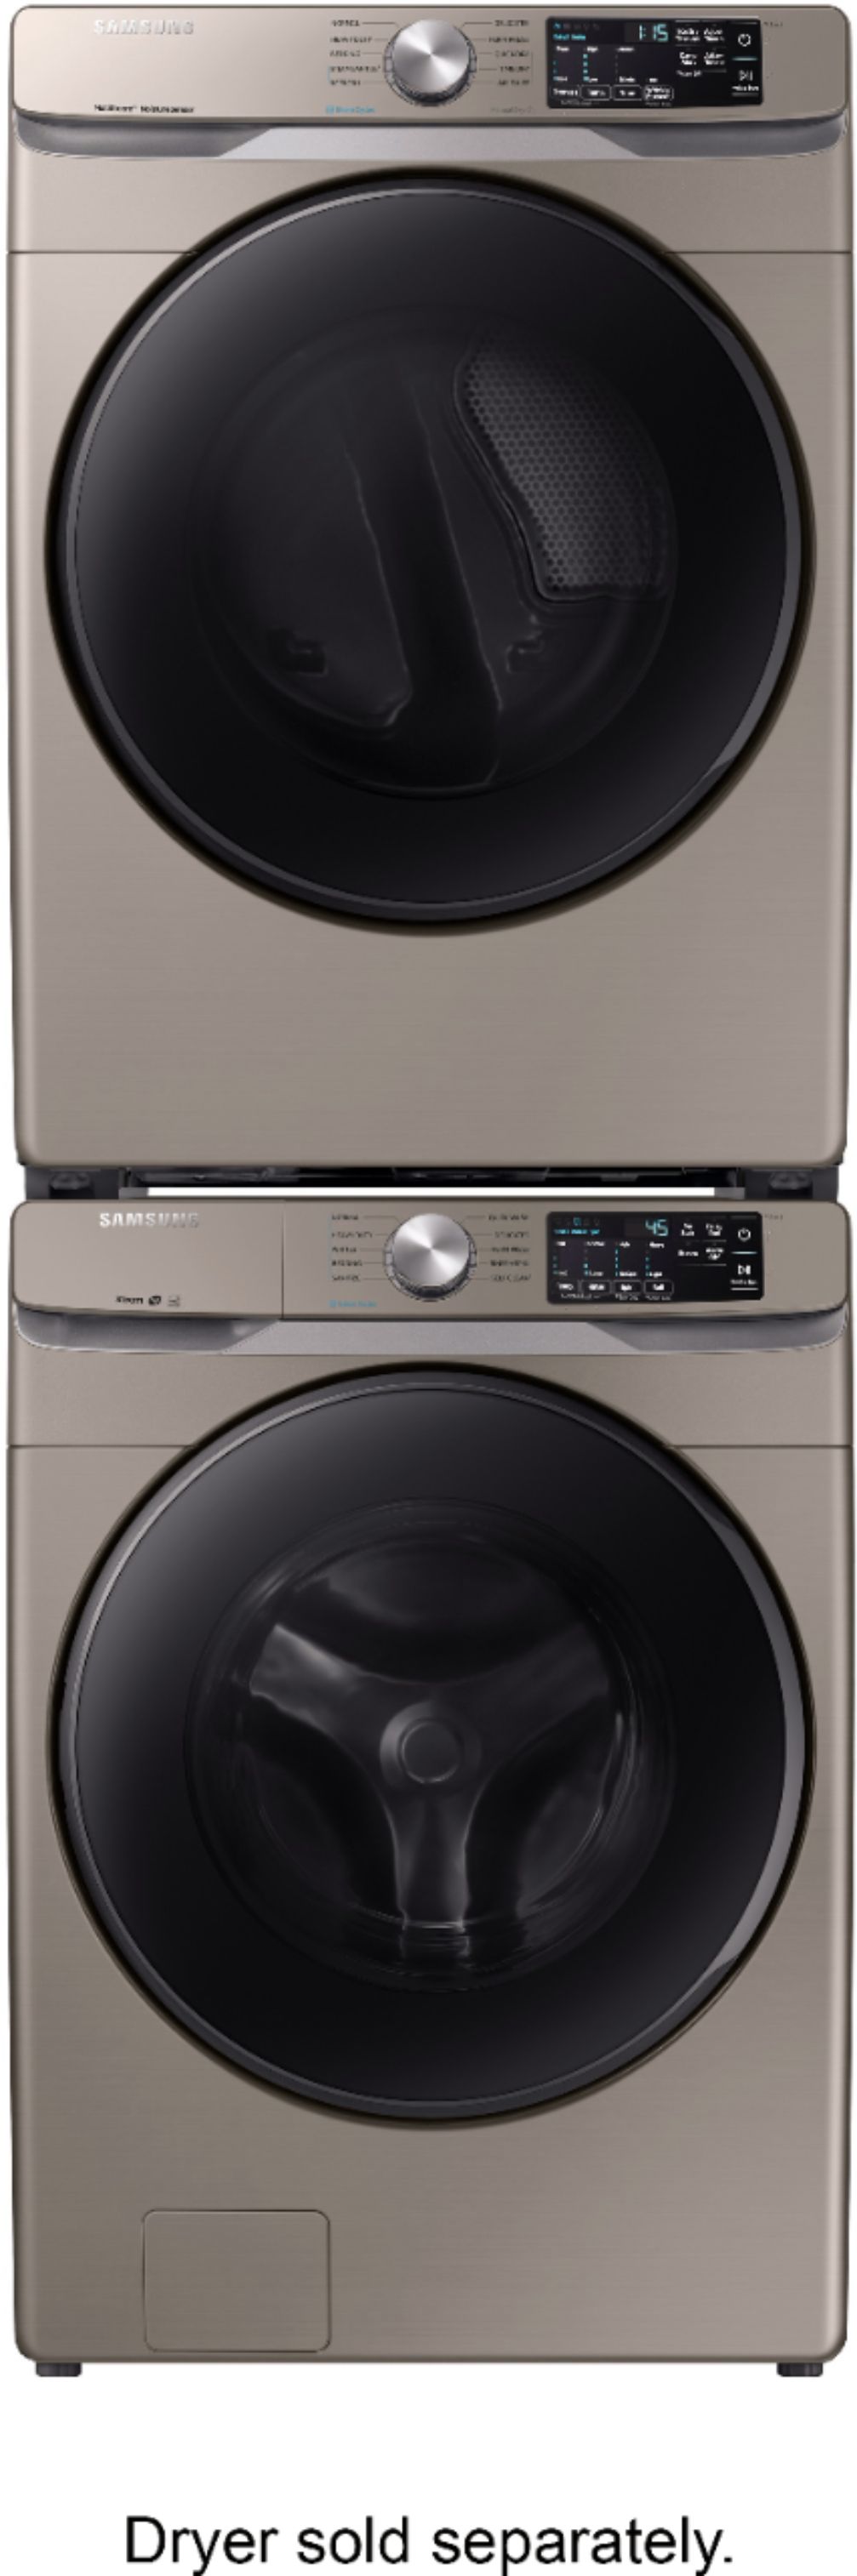 Samsung 4 5 Cu Ft High Efficiency Front Load Washer With Steam Champagne Wf45r6100ac Us Best Buy,Tri Tip Slow Cooker Tacos